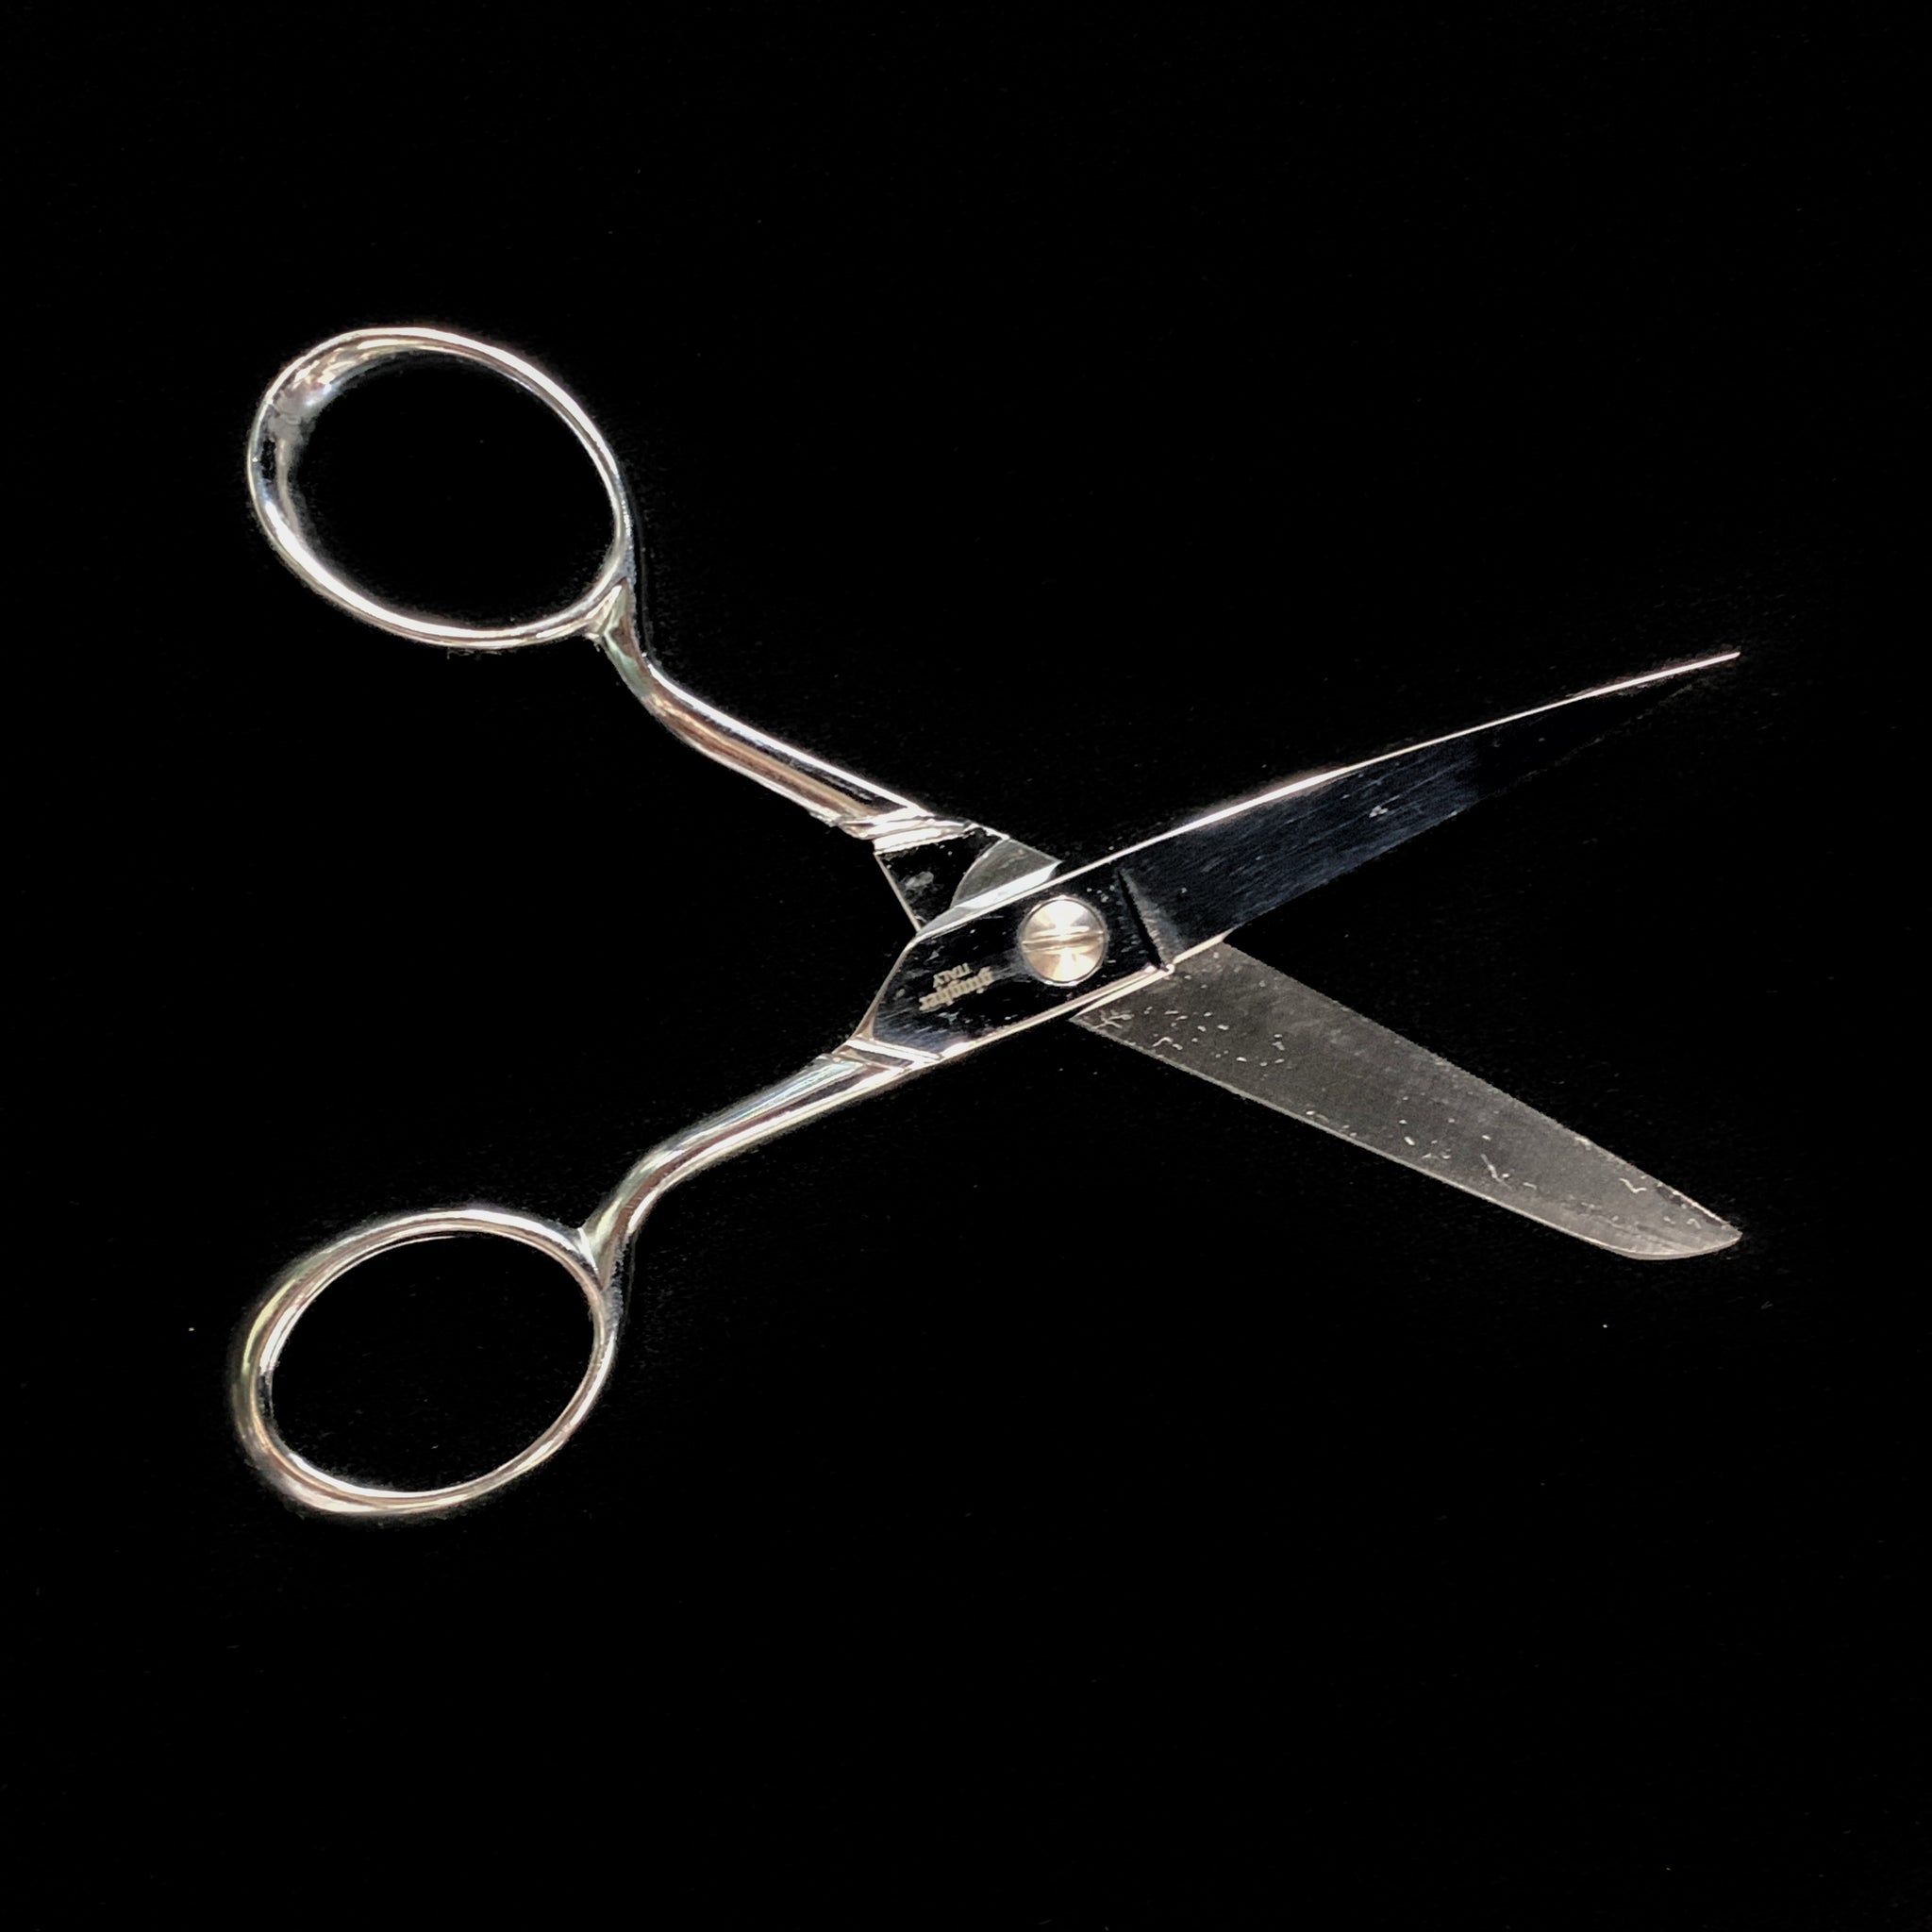 Gingher Sewing Scissors & Shears in Sewing & Cutting Tools 